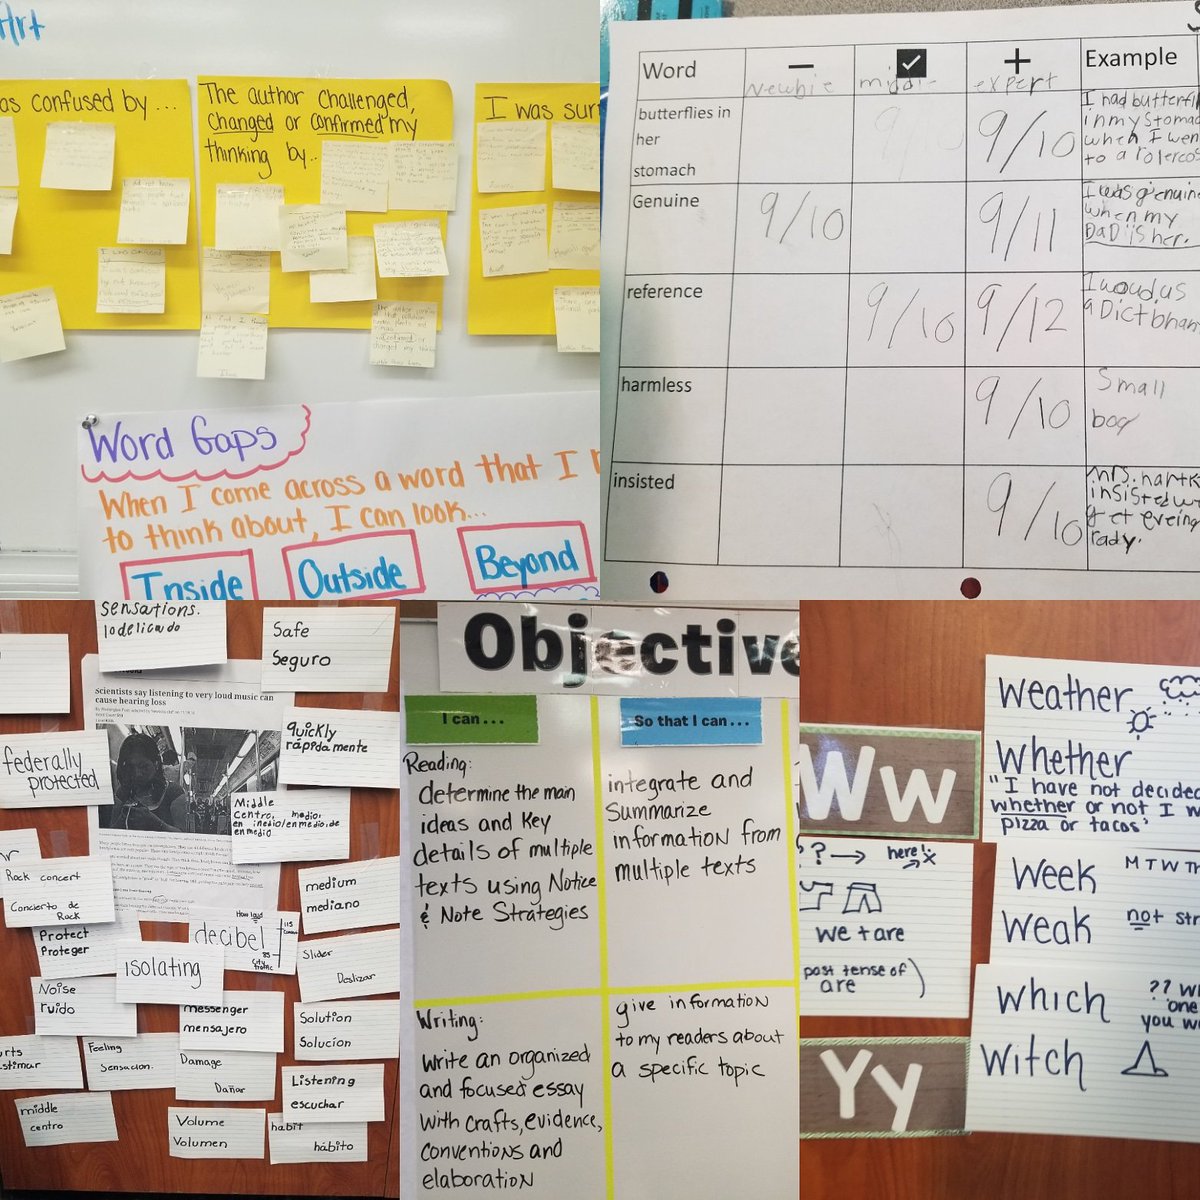 We are making learning VISIBLE and ACCESSIBLE to all students. #readingresource #wordwallpower #vocabvictors #equityineducation @miss_arata @kate_nartker @WoodbridgeElem @HCPSArea2 @HCPSElemELA